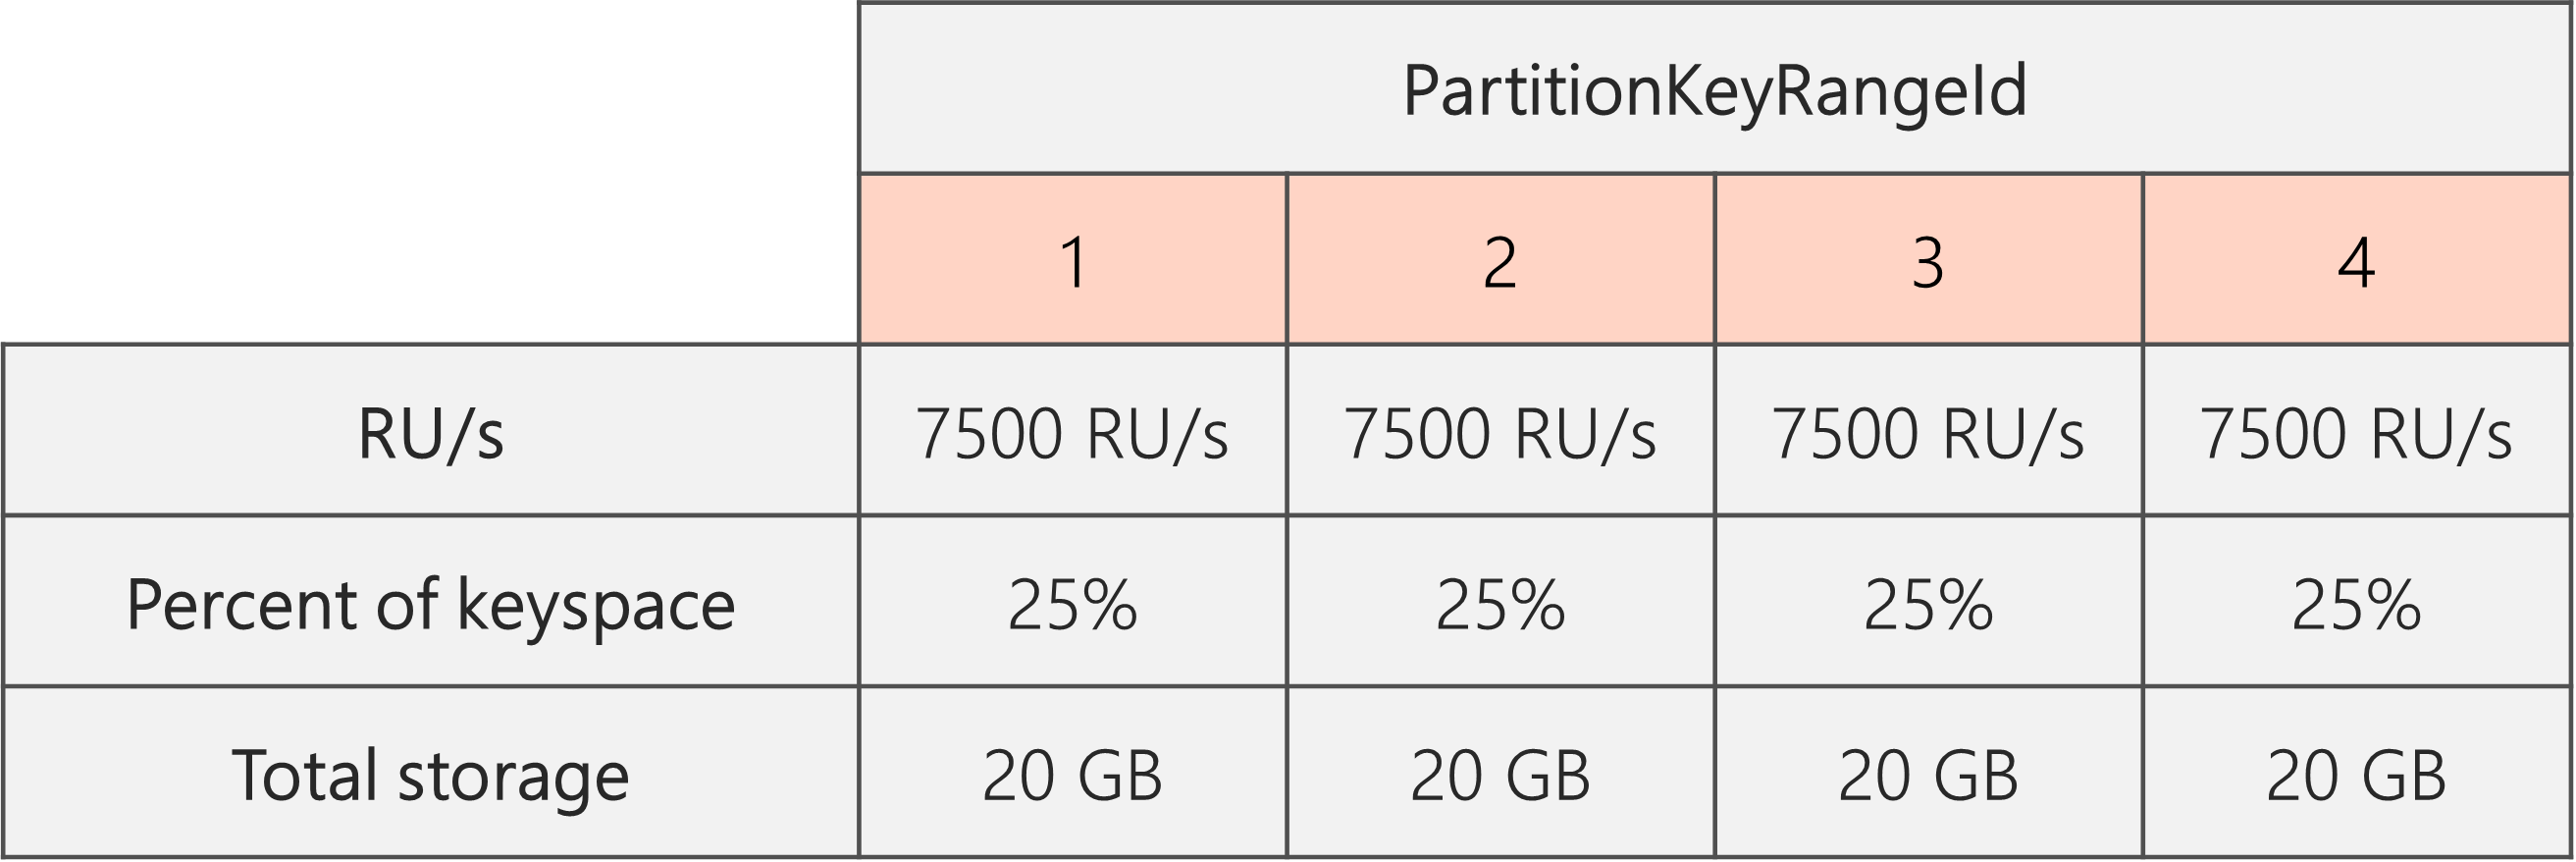 After the split completes and the RU/s has been lowered from 40,000 RU/s to 30,000 RU/s, there are 4 PartitionKeyRangeIds, each with 7500 RU/s and 25% of the total keyspace (20 GB)